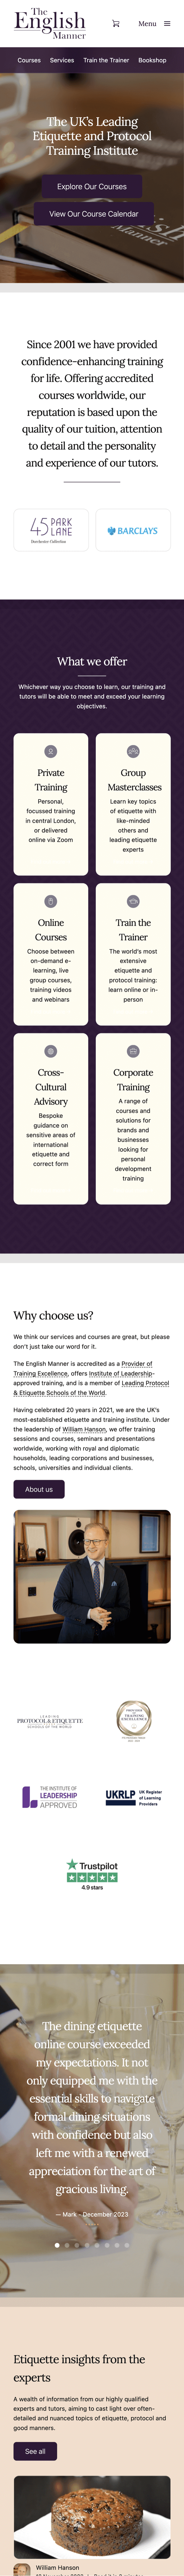 The English Manner (Website simulation on a smartphone)